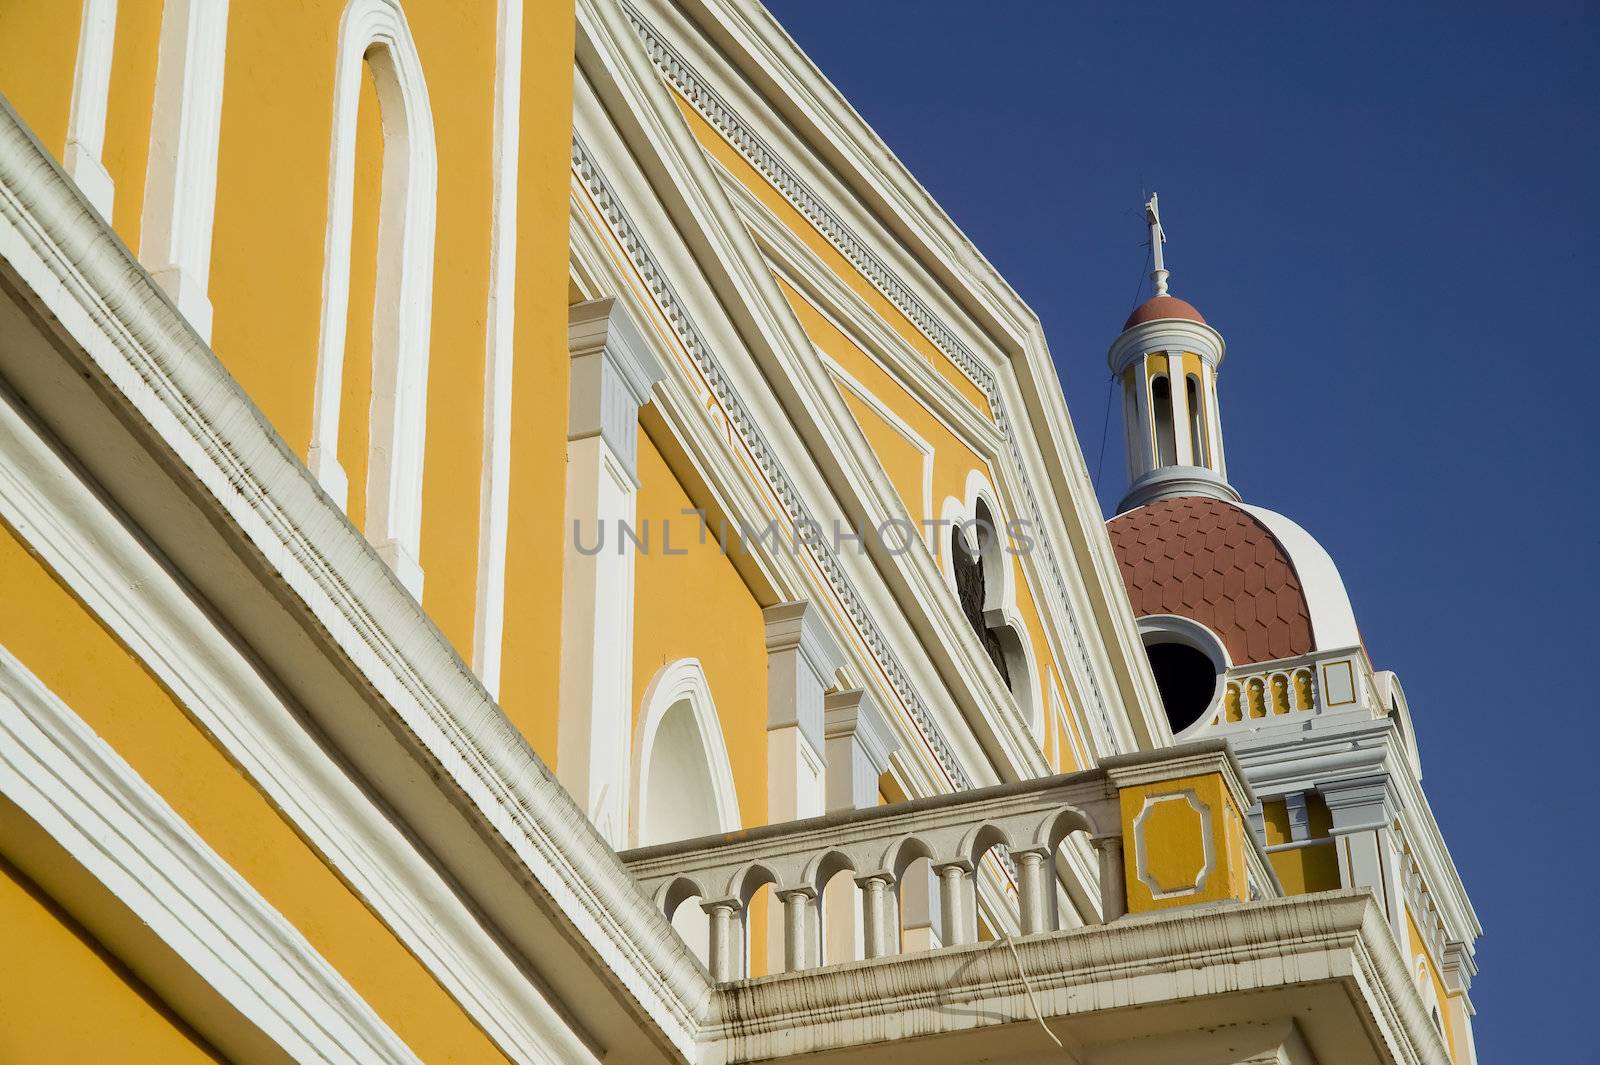 Architectural detail from the yellow cathedral in central Granada Nicaragua